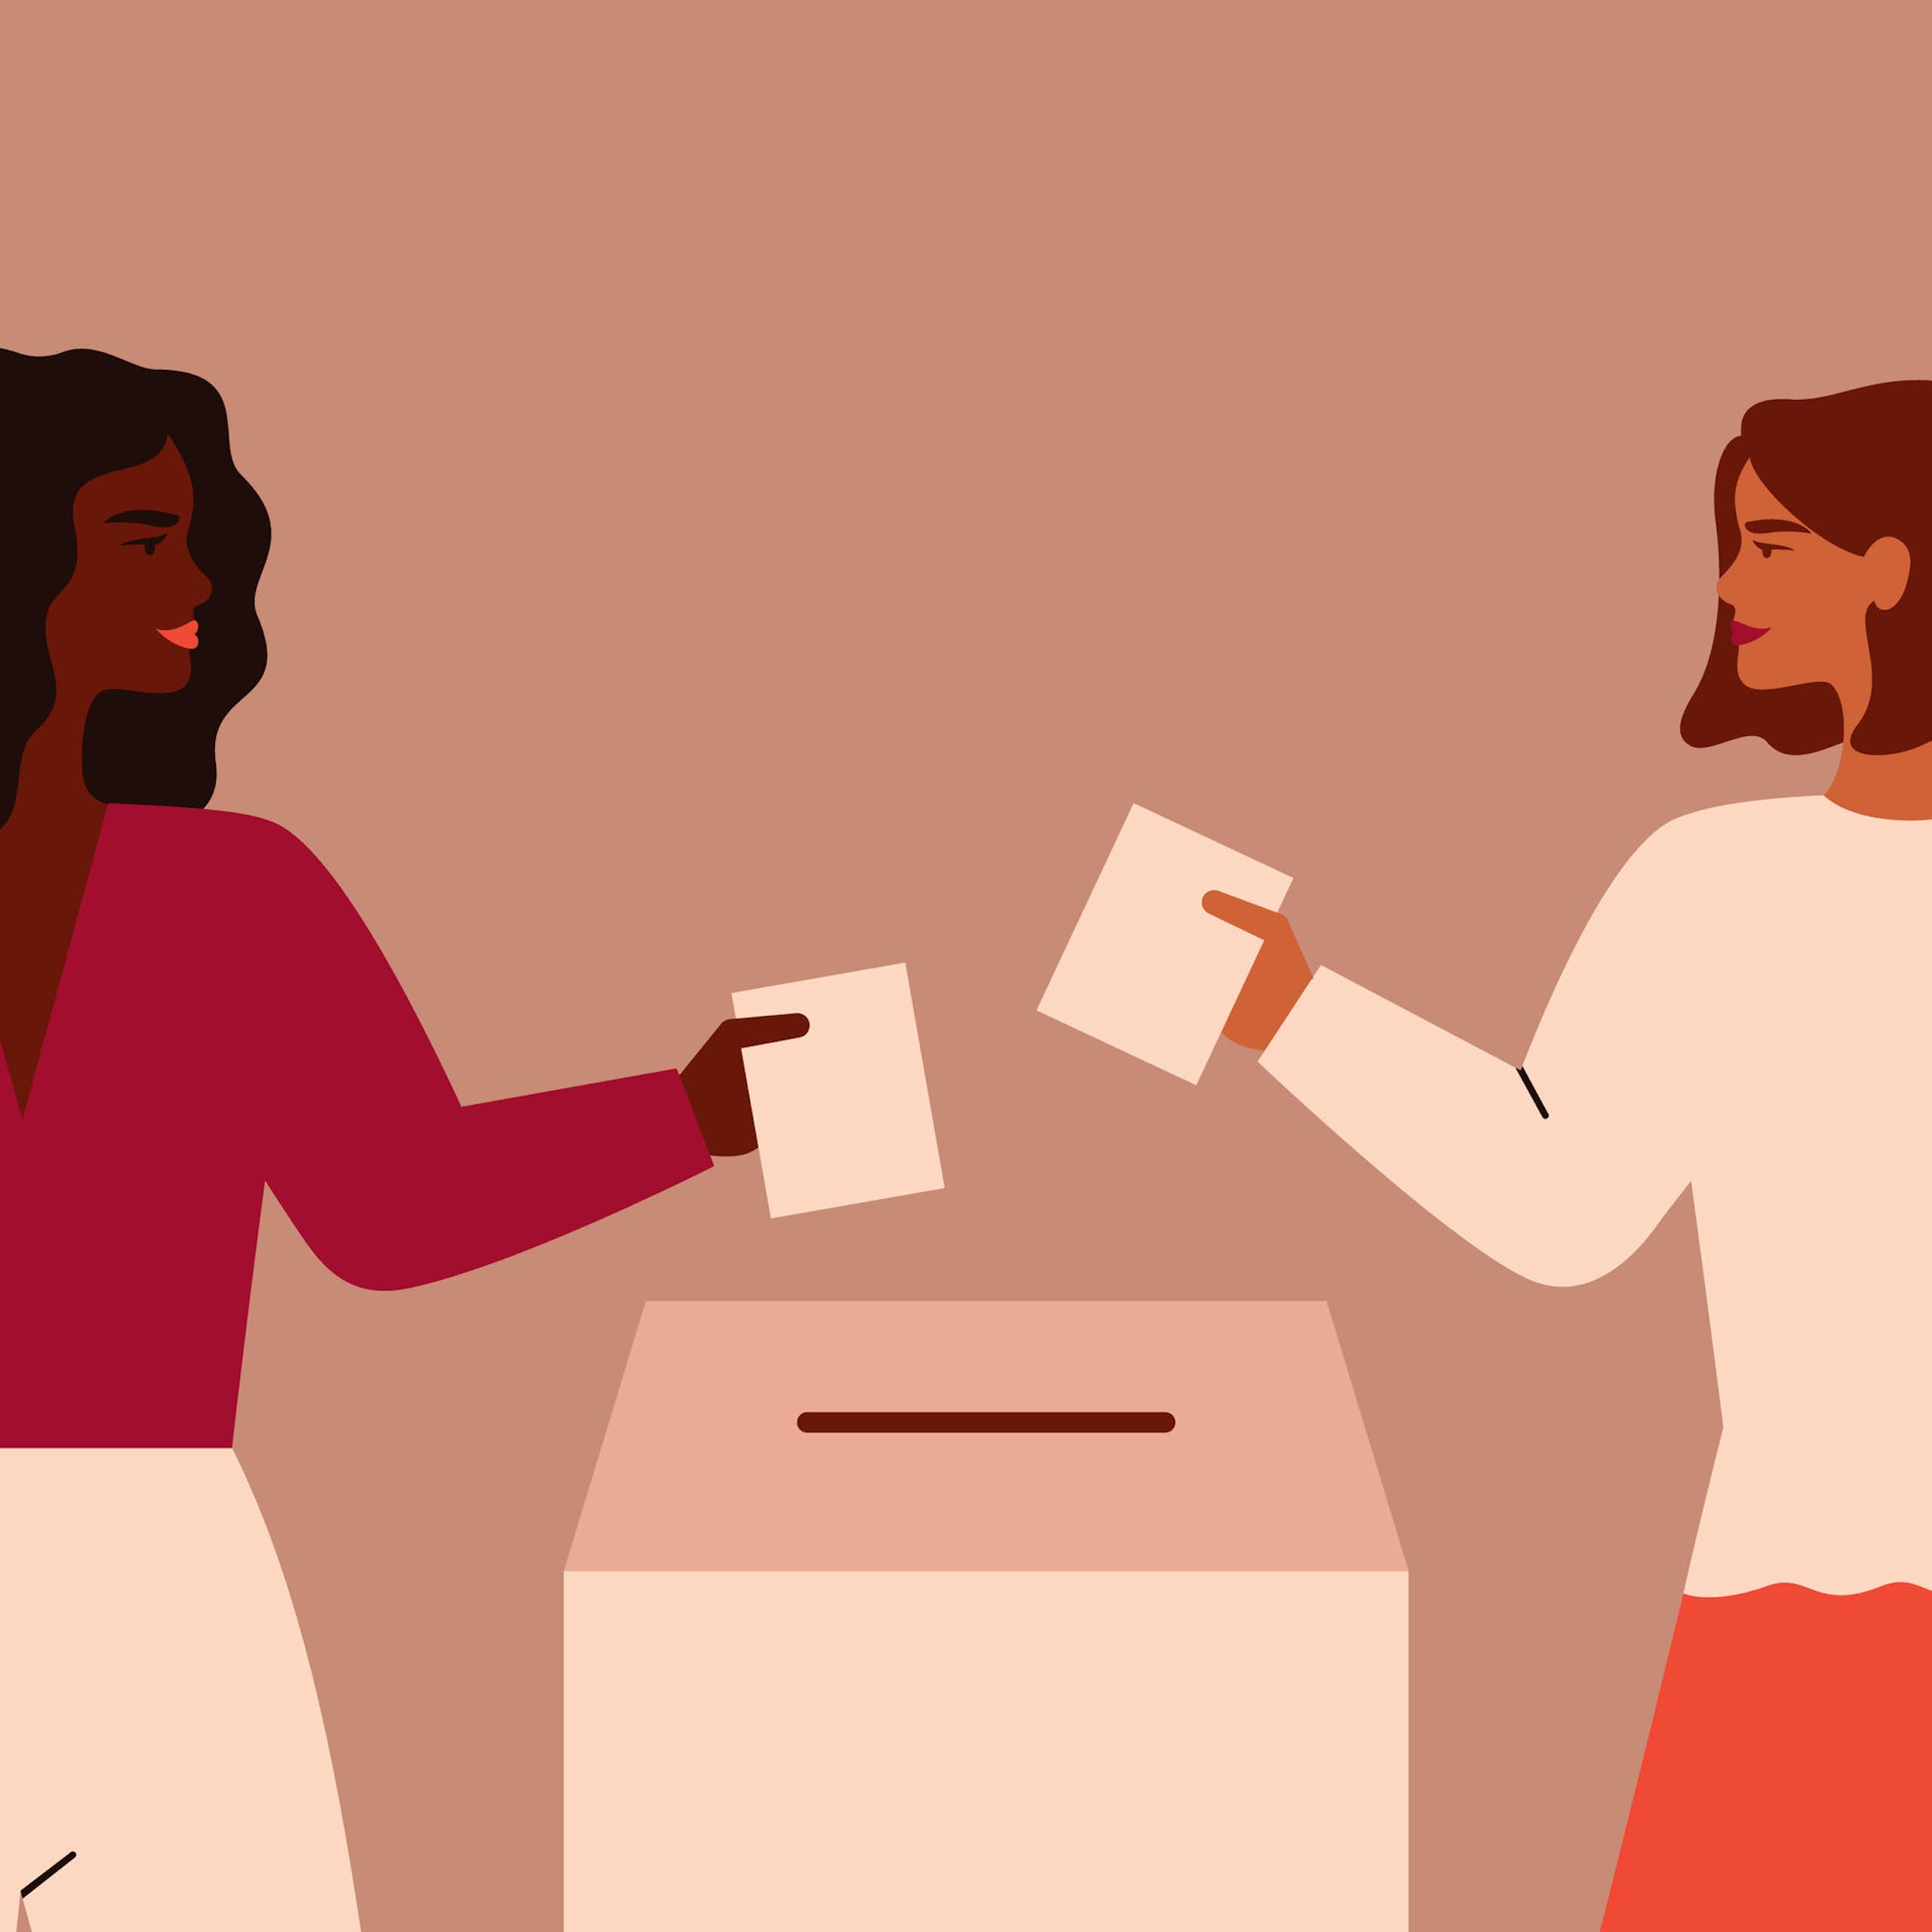 Illustration in pink and brown tones of two women placing ballots into a box